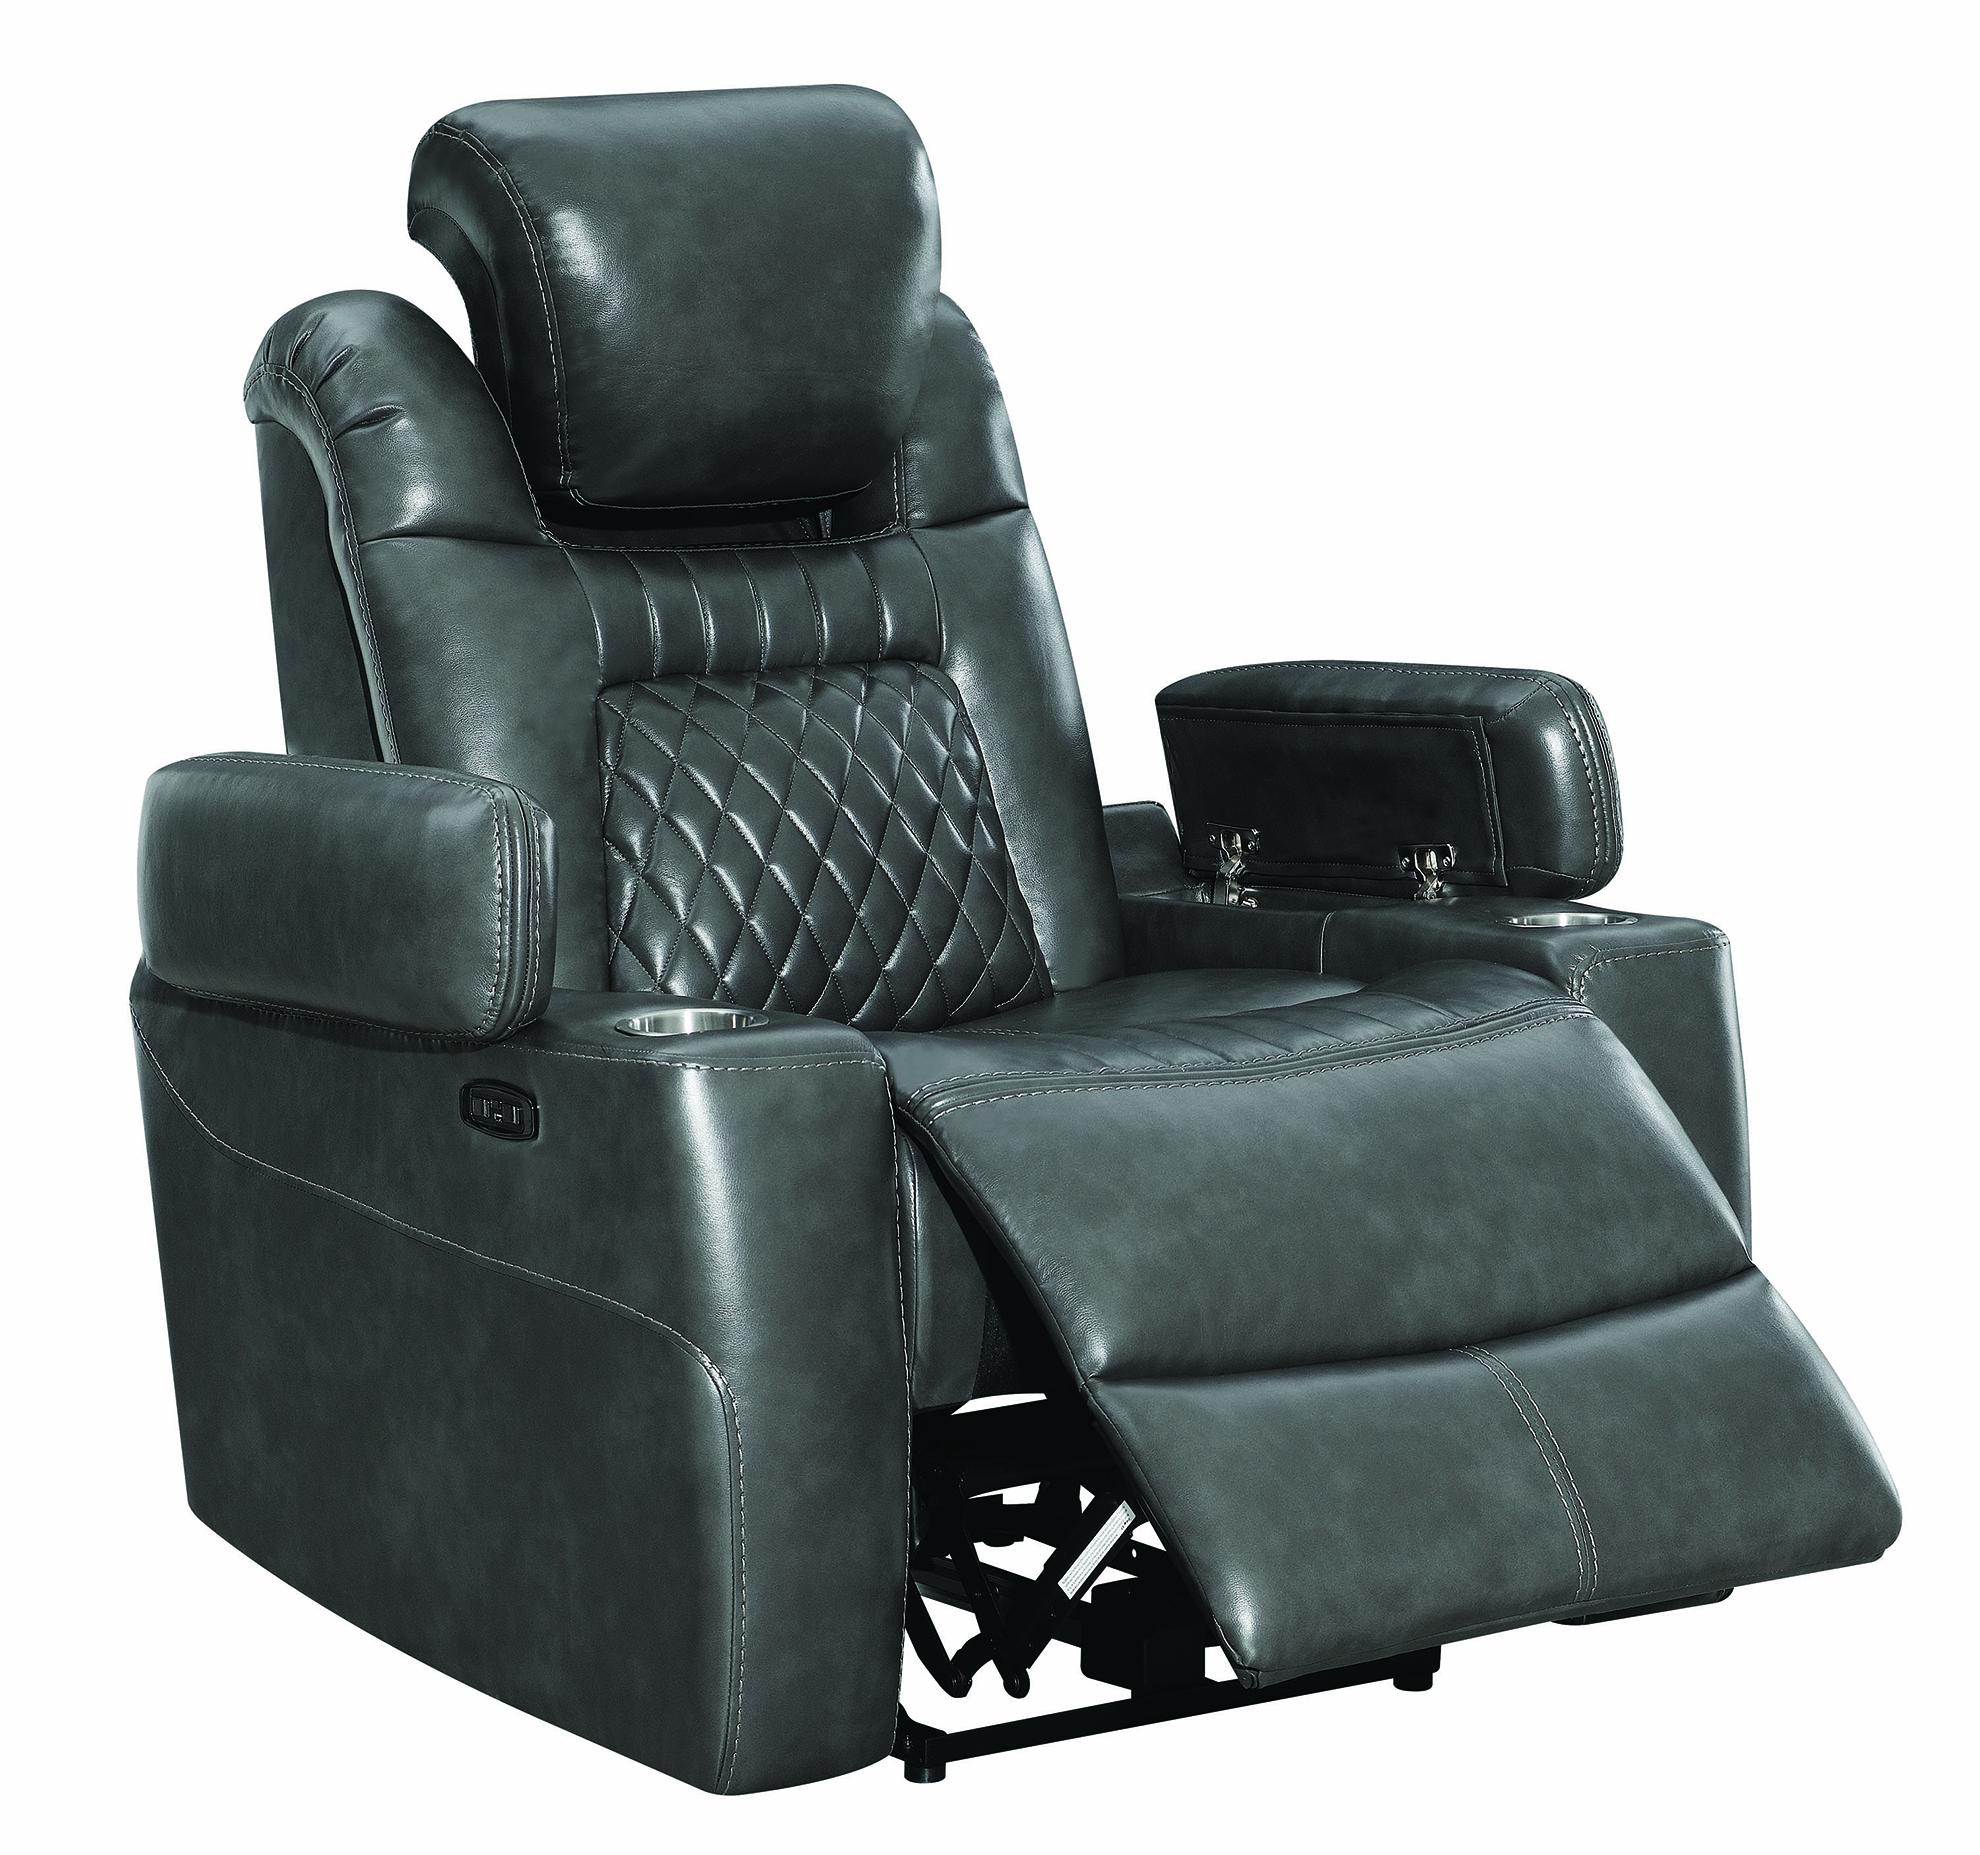 

    
Coaster 603416PP Korbach Power recliner Charcoal 603416PP
